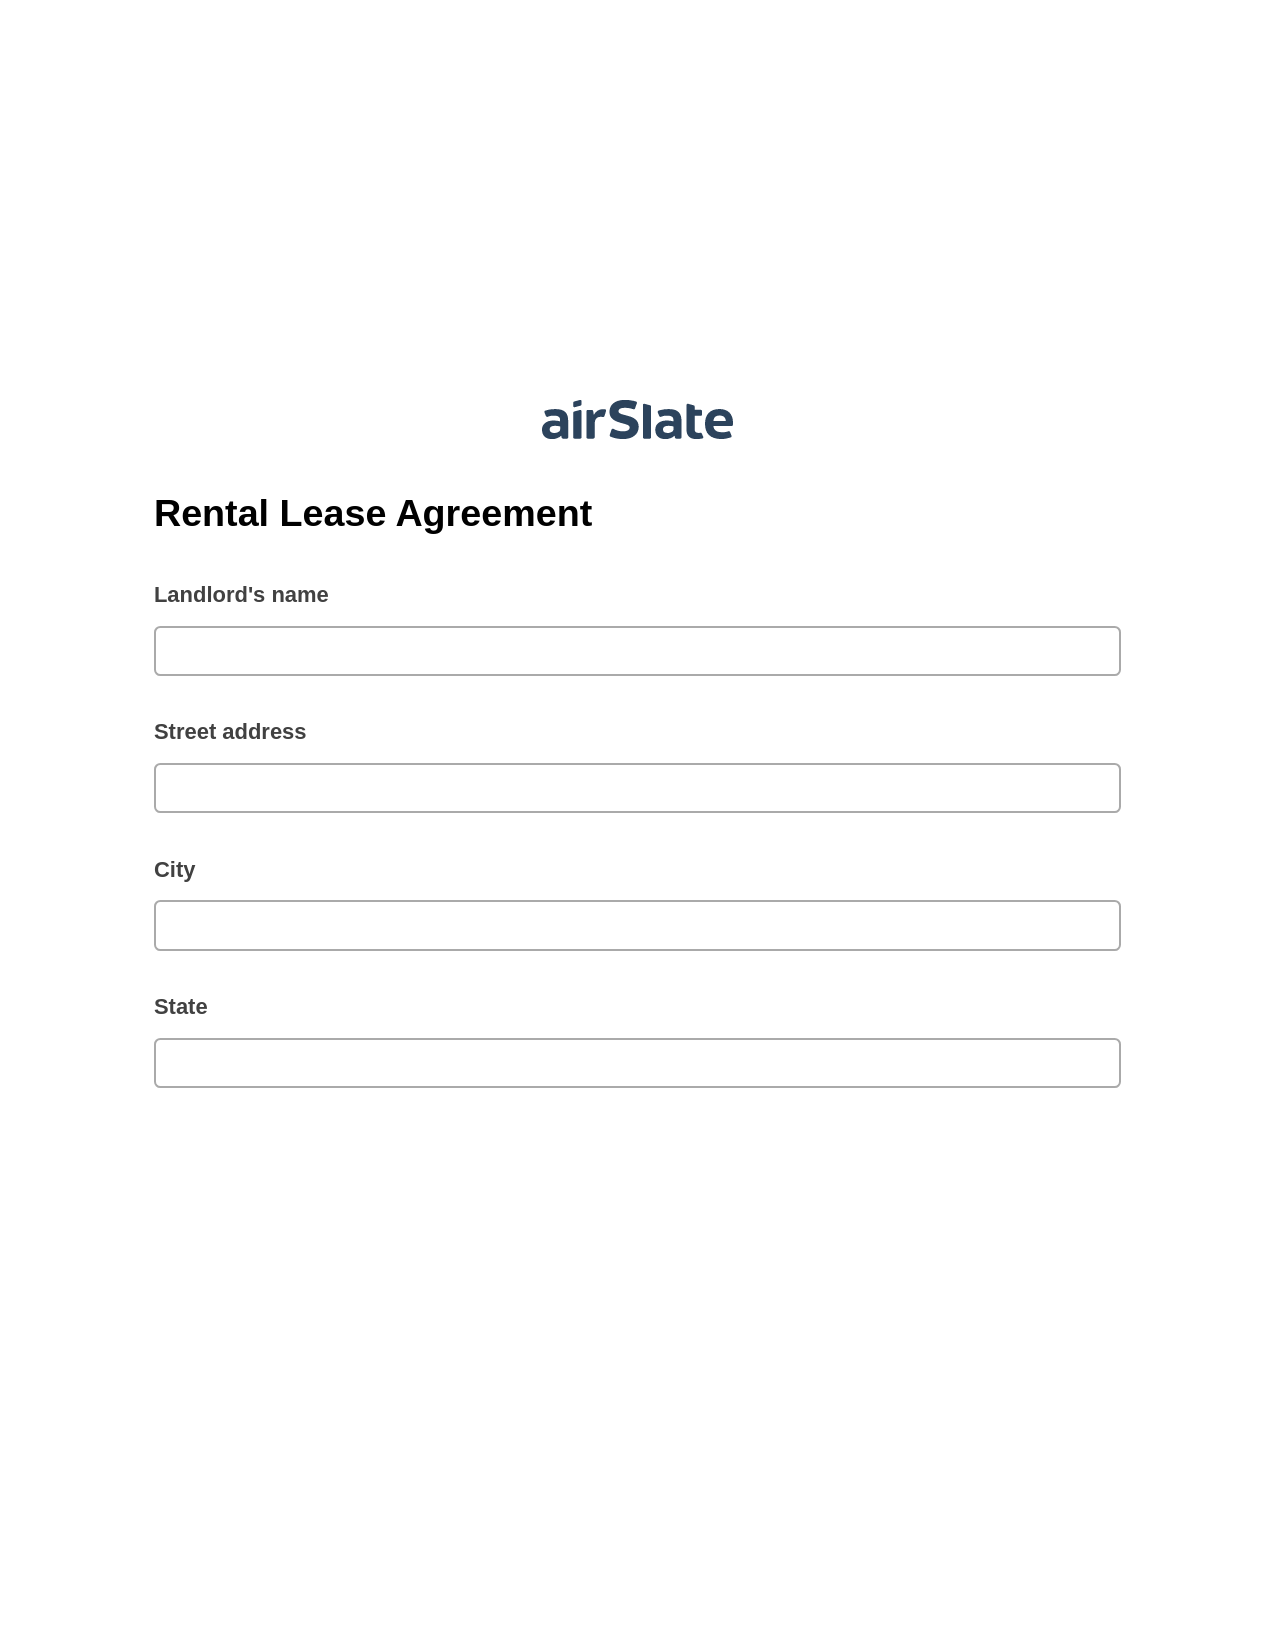 Rental Lease Agreement Pre-fill from Google Sheets Bot, Document Hide Bot, Export to Salesforce Bot